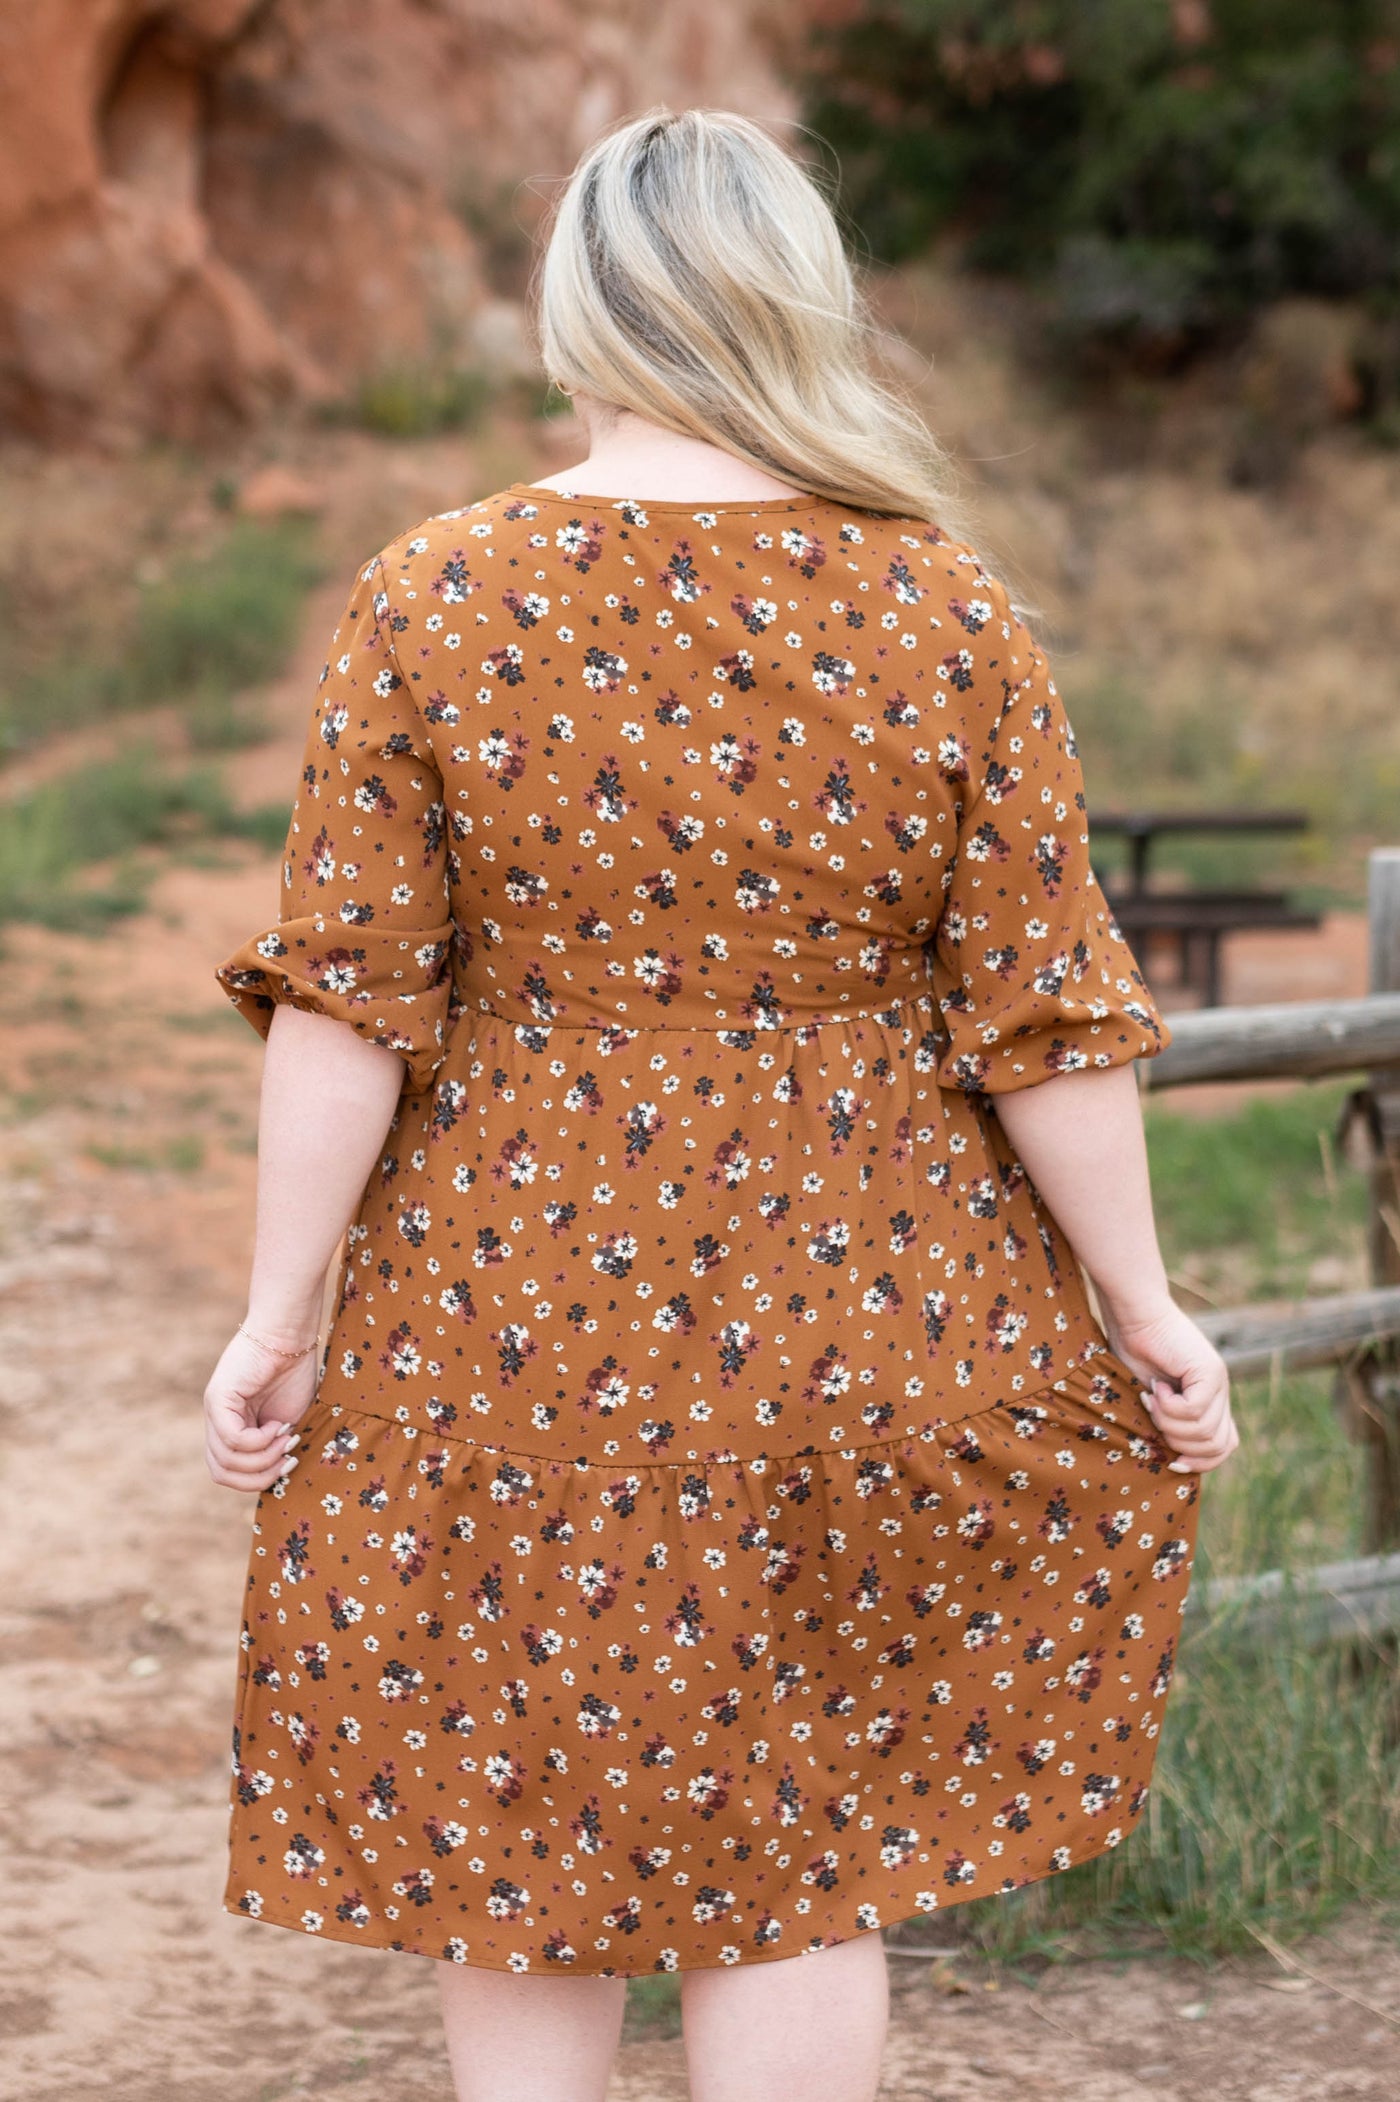 Back view of the plus size camel dress